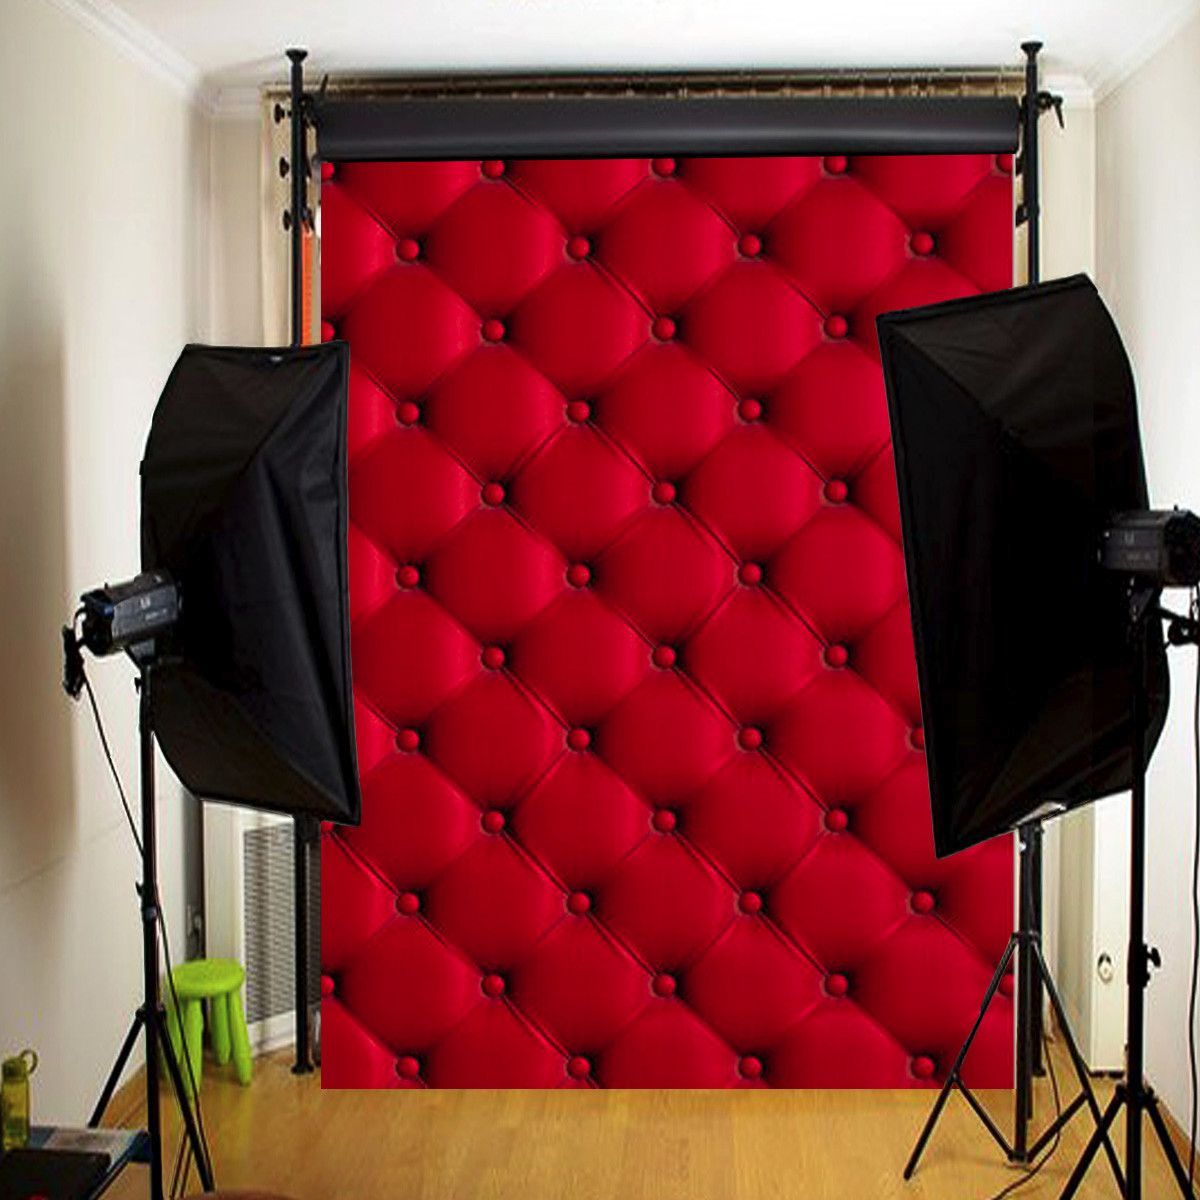 5X7FT-3D-Red-Wall-Cloth-Photography-Background-Backdrop-Props-for-Photo-Studio-1125879